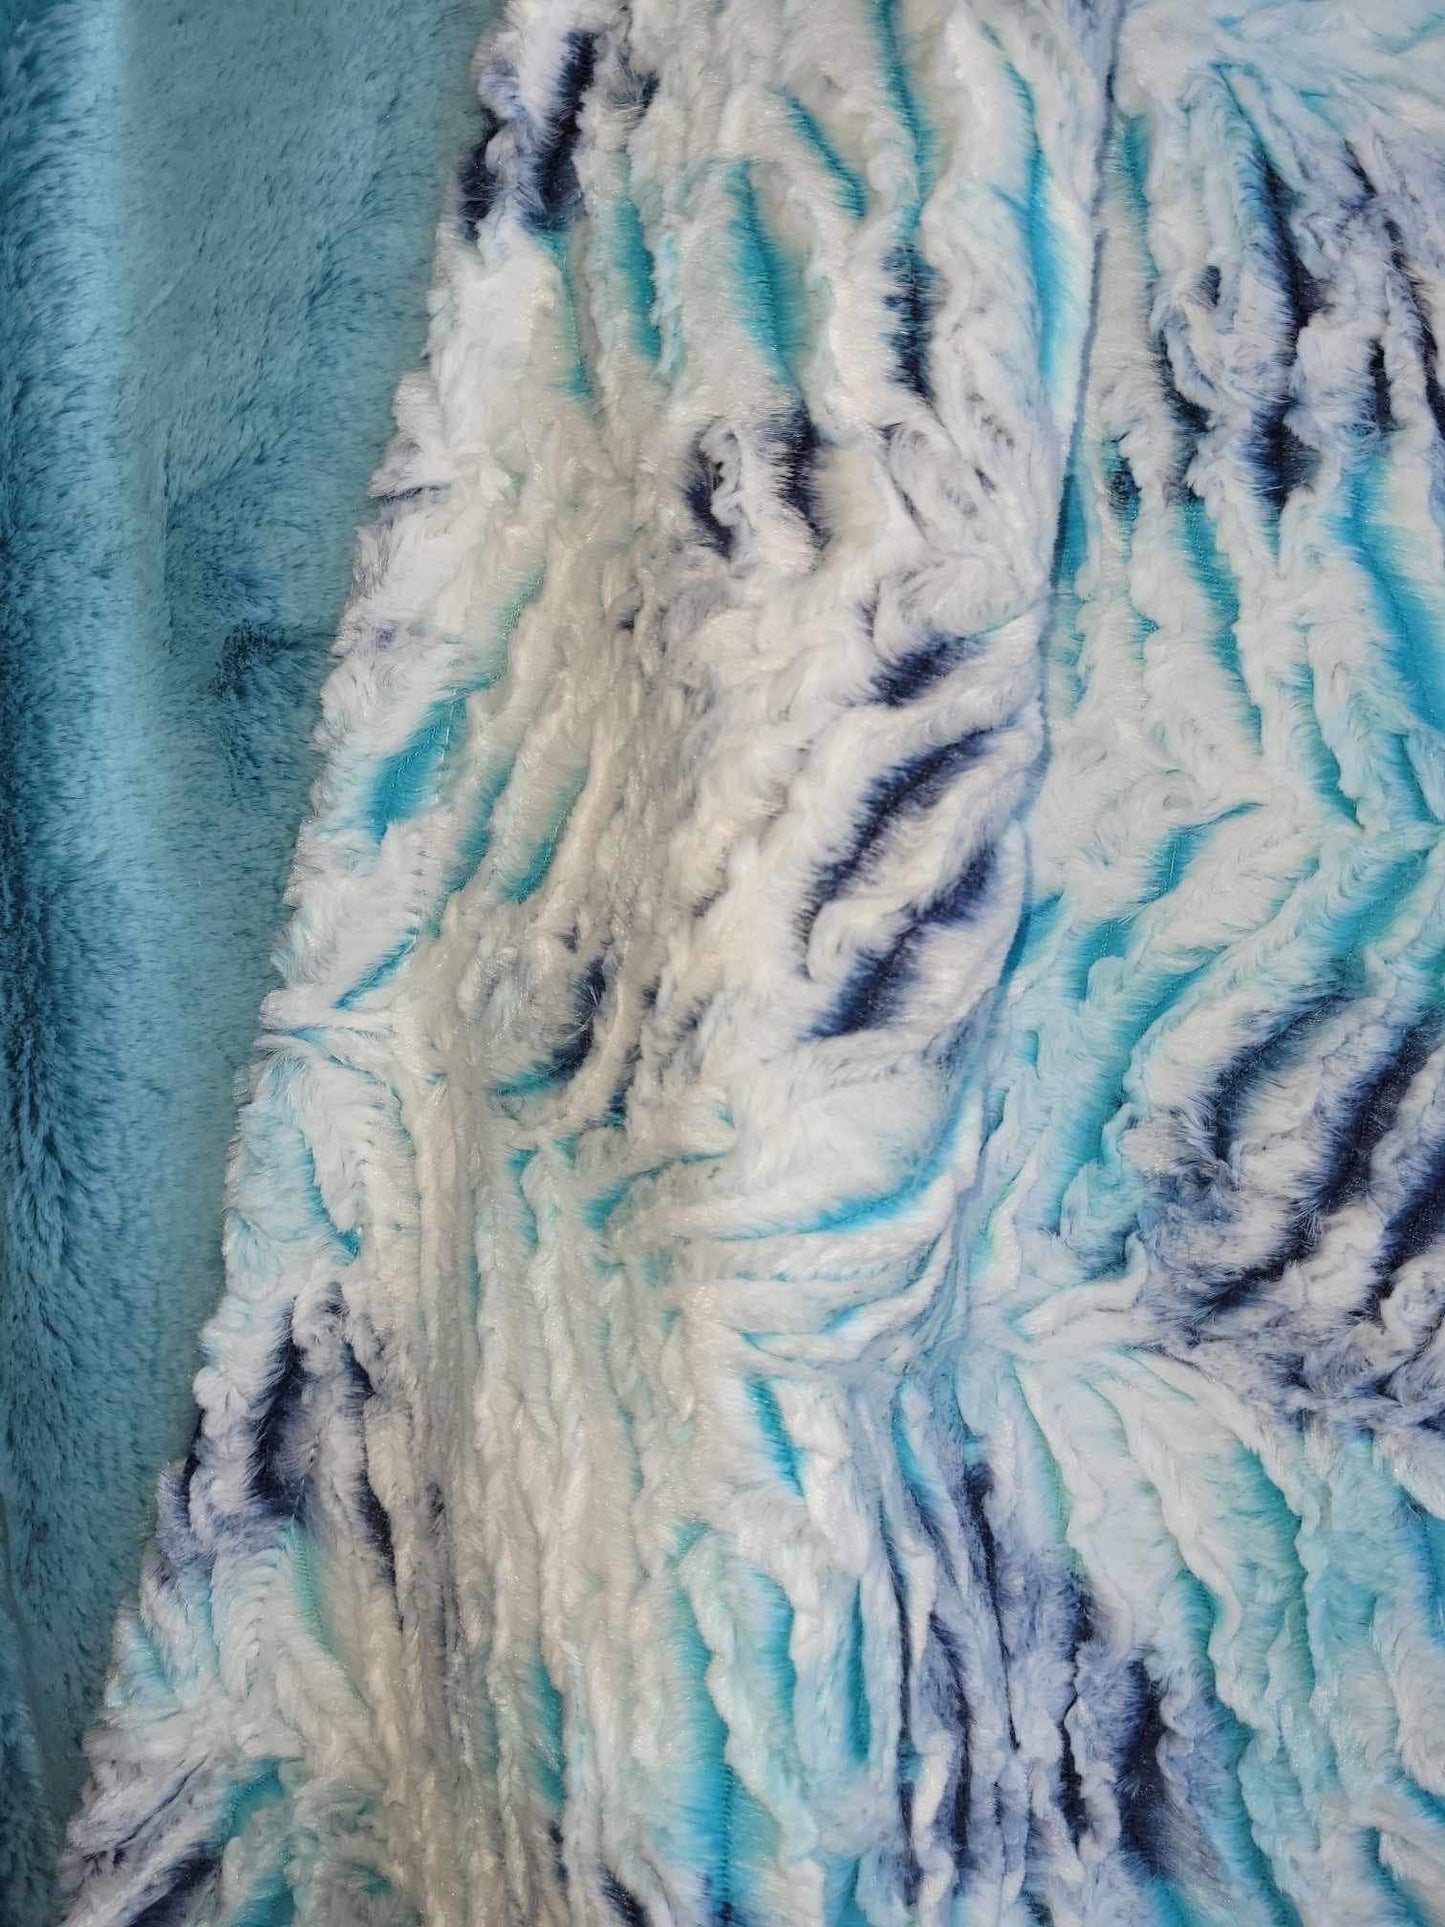 Blue Prism Minky Cuddle Blanket, EXTREMELY SOFT and cozy, measures 54” x 60”. Luxury Blanket, faux fur blanket, Ships from the USA.